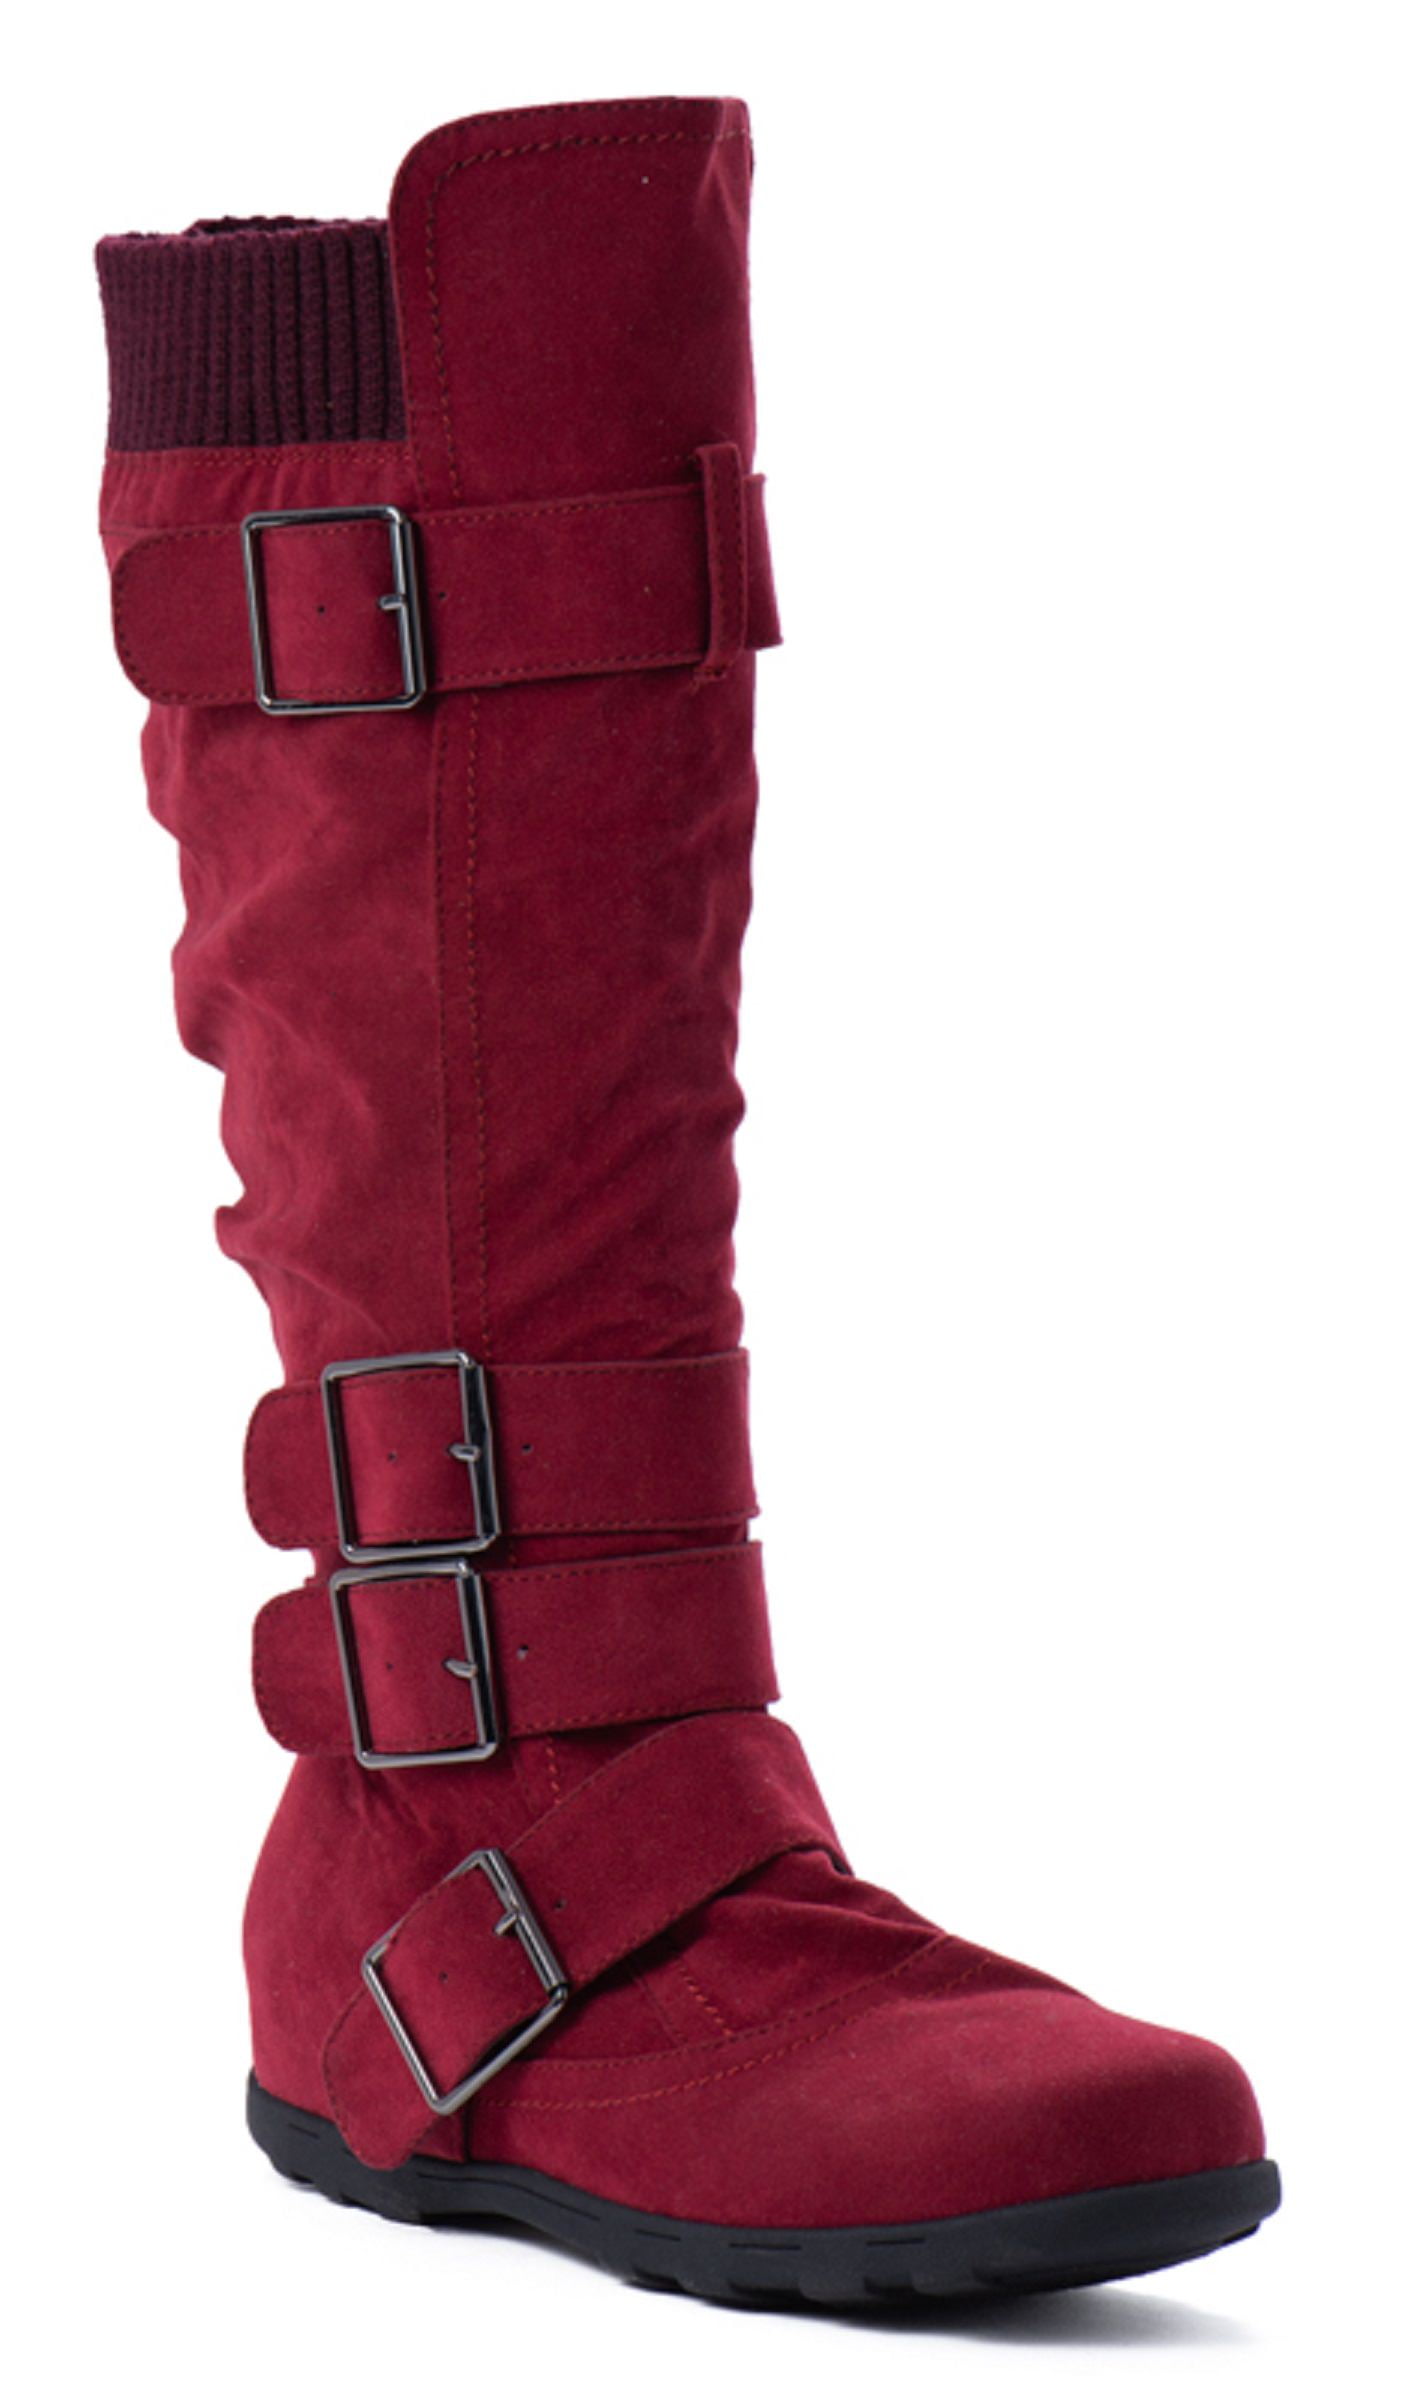 Women's Knee High Mid Calf Boots Ruched Suede Slouch Knitted Calf ...